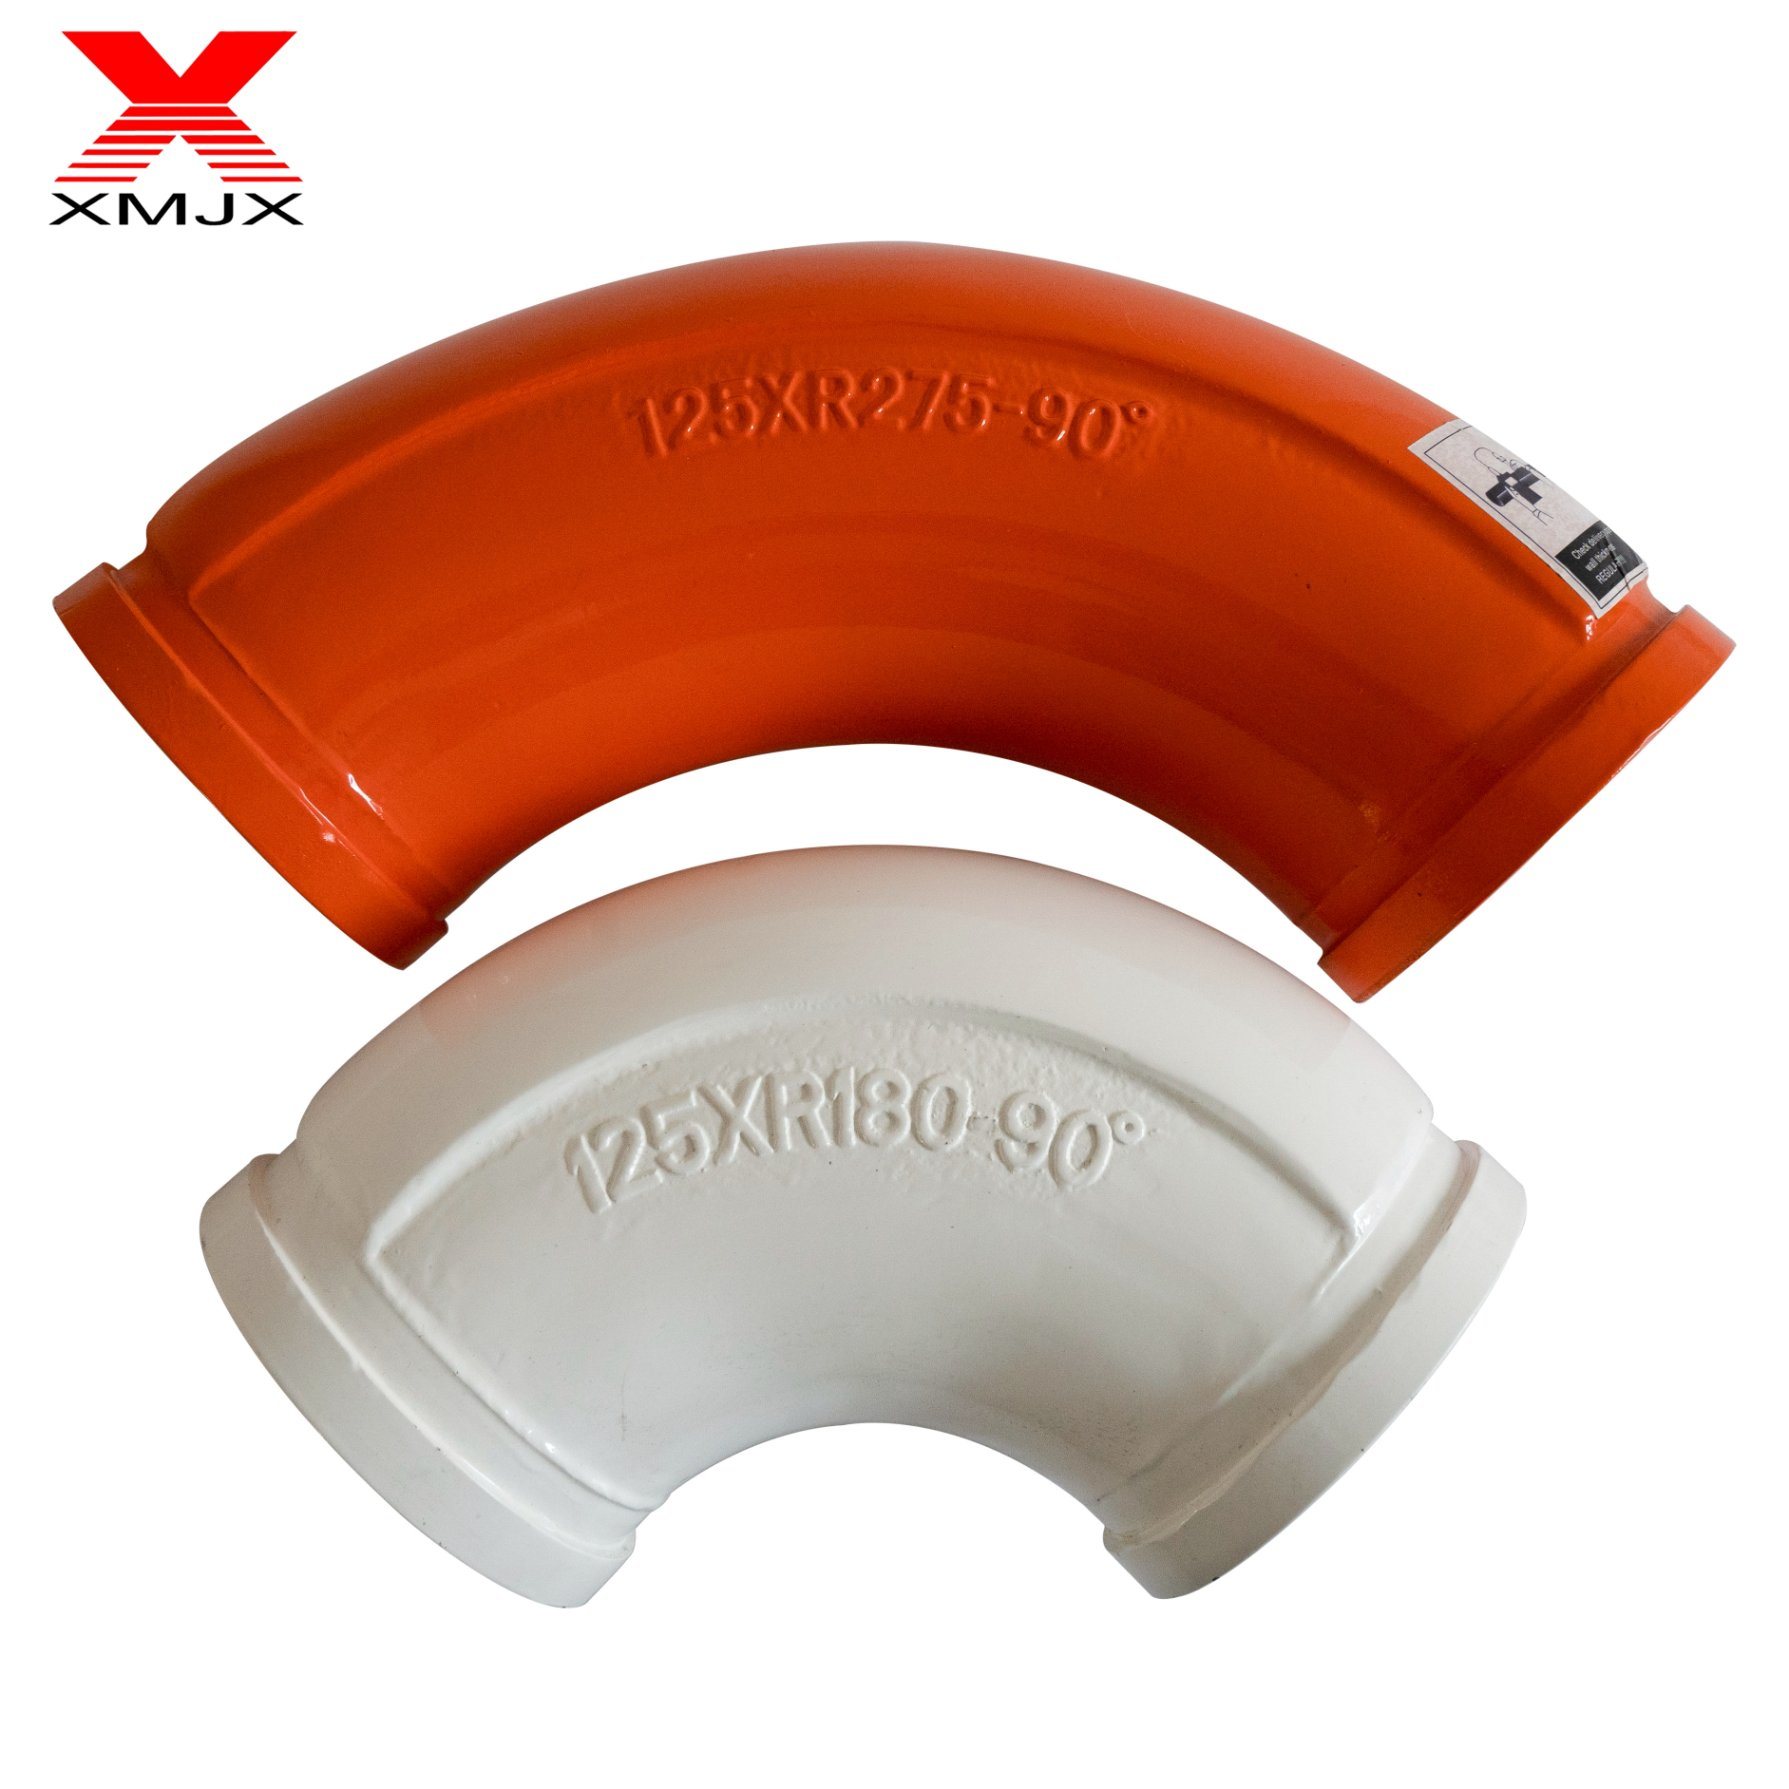 OEM/ODM Factory Schwing clamp - 15.5kg R275 90d Double Wall Elbow with Low Price and Perfect Quality – Ximai